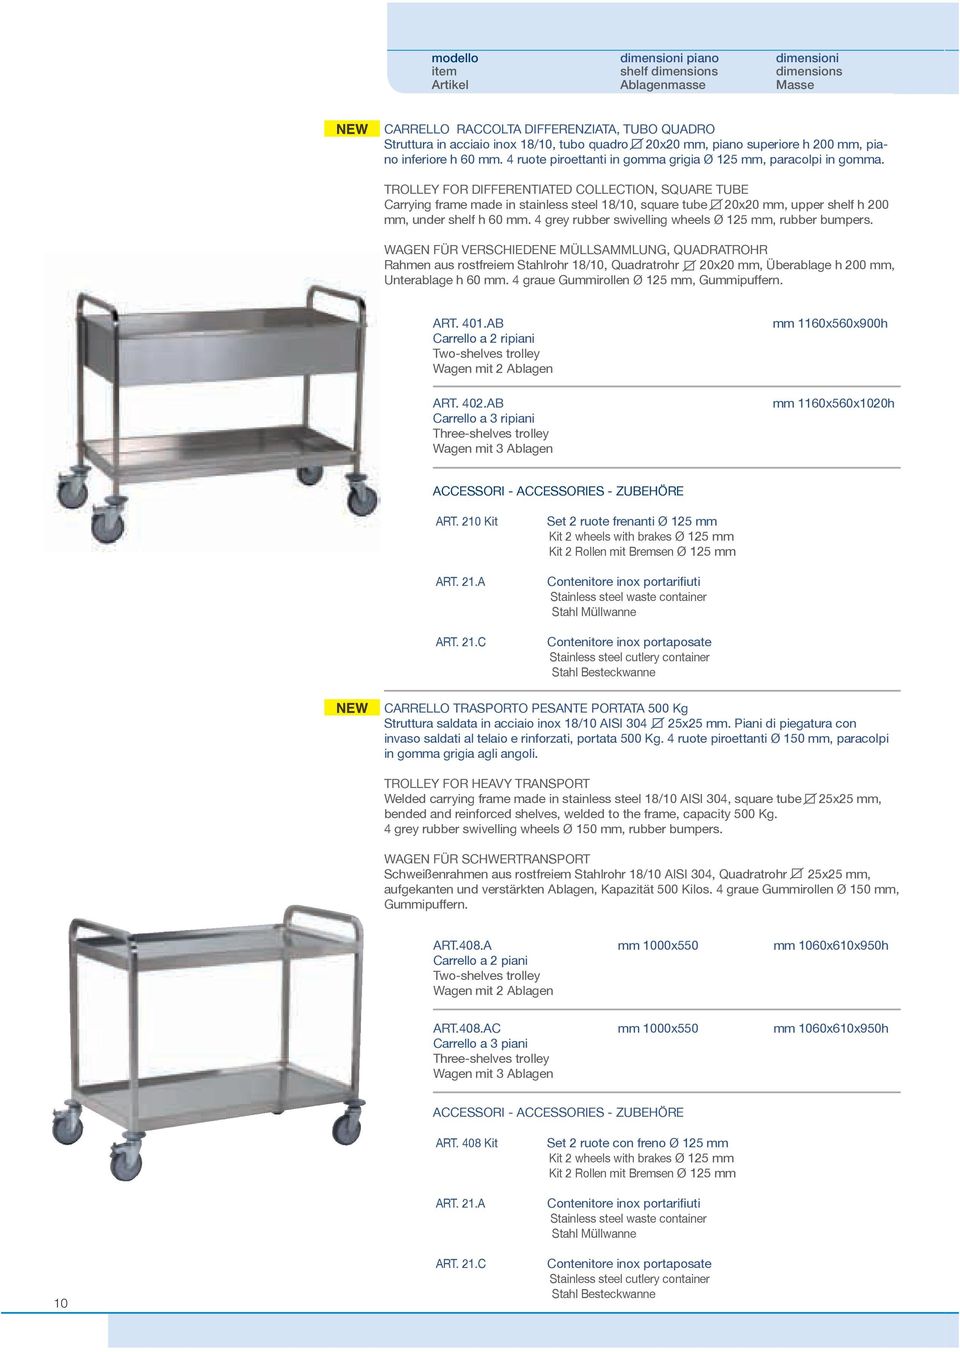 TROLLEY FOR DIFFERENTIATED COLLECTION, SQUARE TUBE Carrying frame made in stainless steel 18/10, square tube 20x20 mm, upper shelf h 200 mm, under shelf h 60 mm.